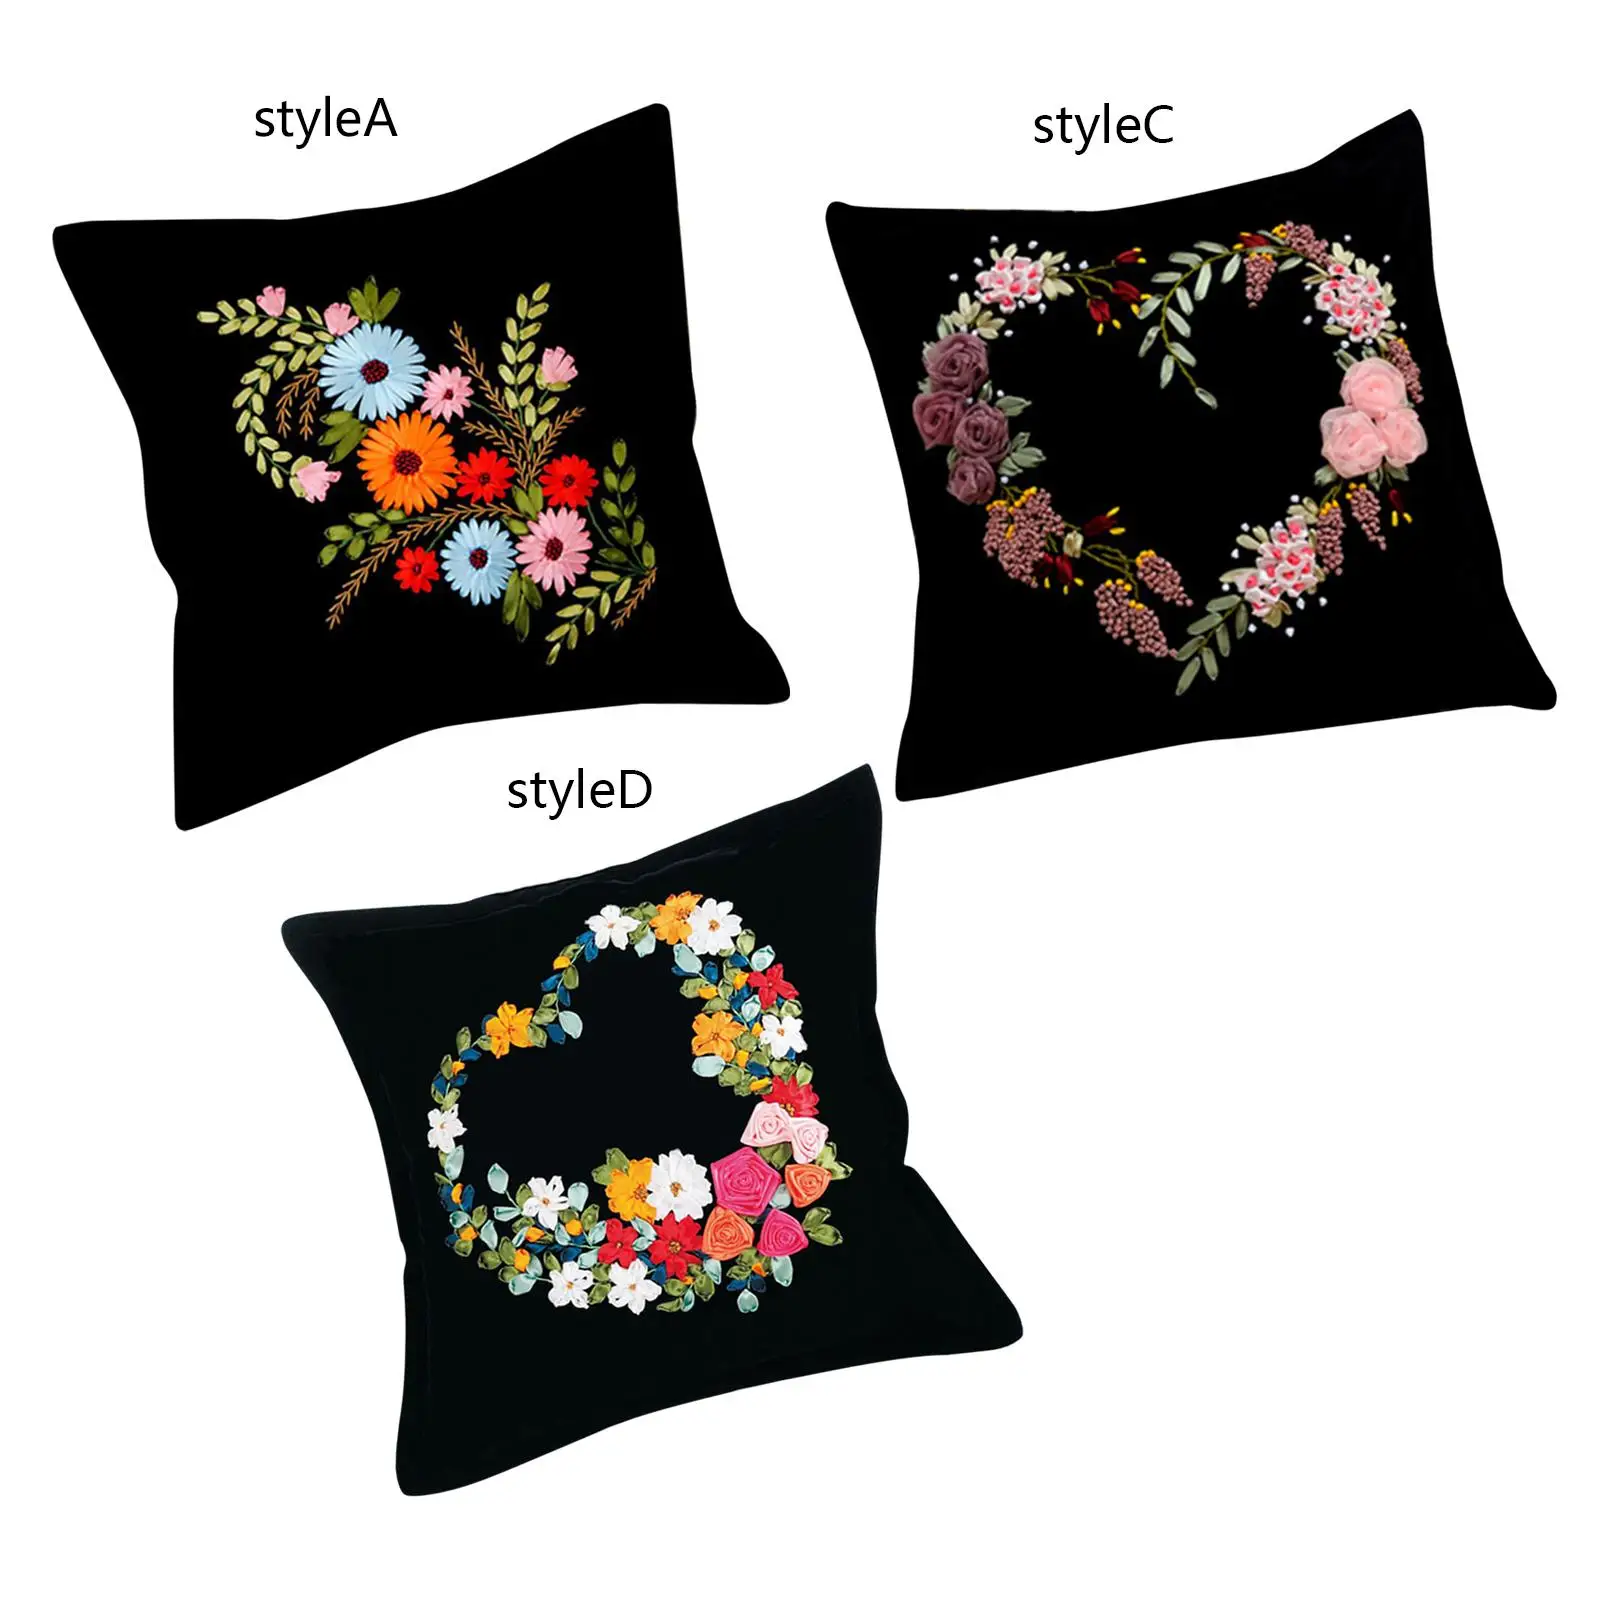 Embroidery Pillow Covers Kits Art Craft Pillow Case Needlework Sewing Cross Stitch Home Decoration Adults Painting Gift